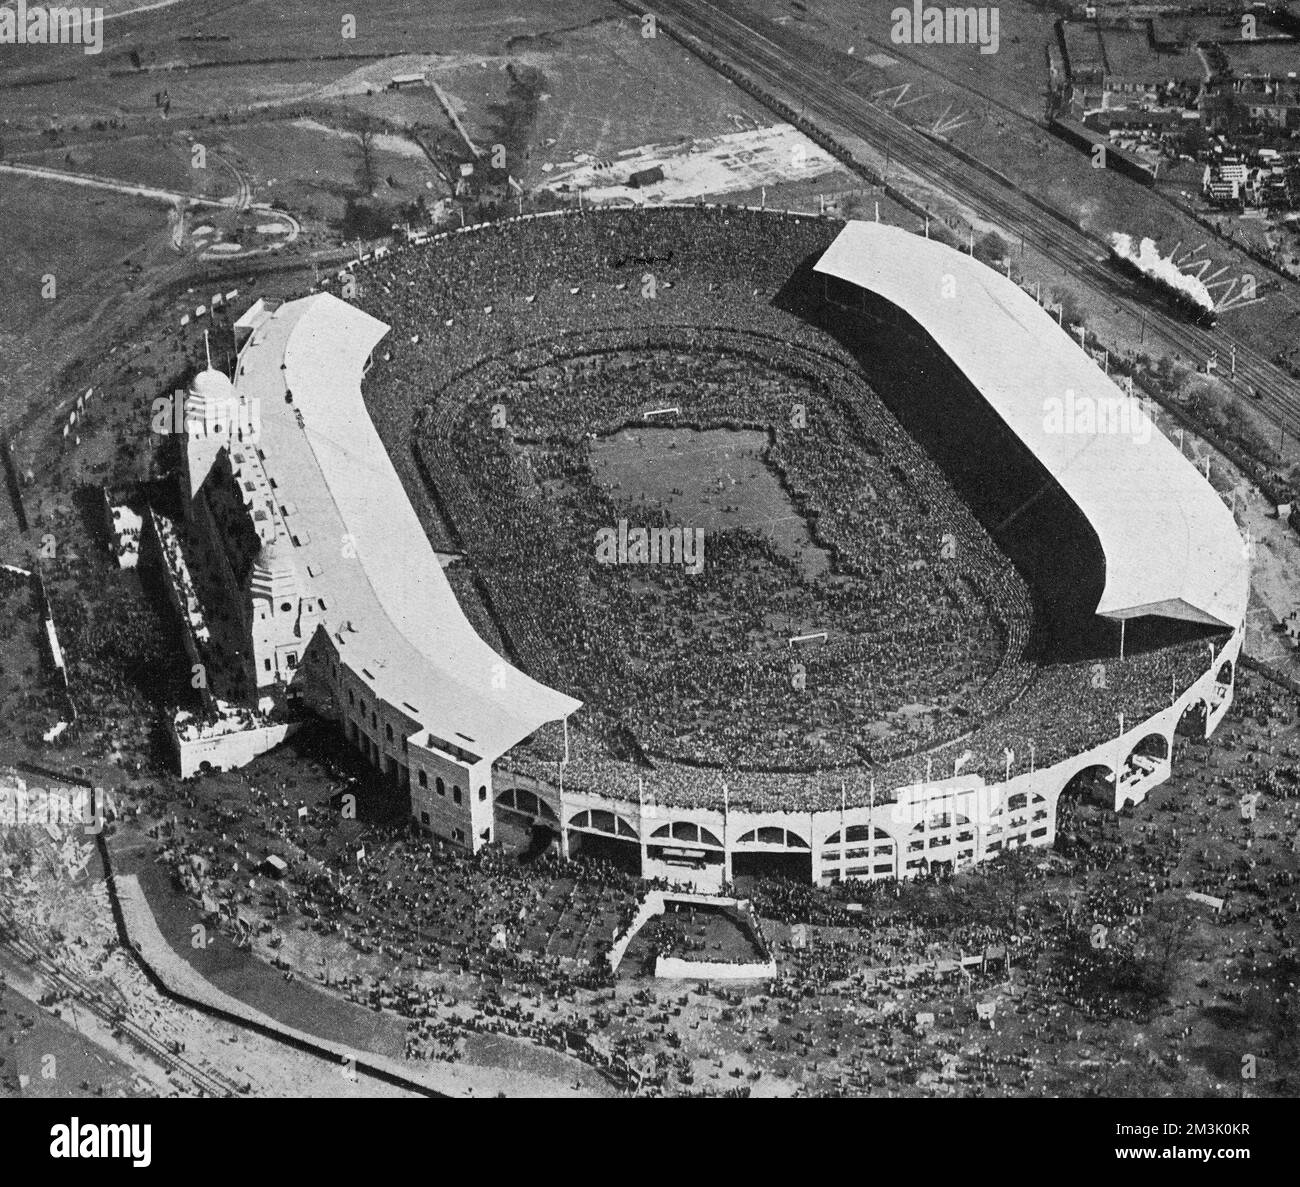 Aerial photograph of Wembley Stadium before the start of the 1923 F.A. Cup Final between Bolton Wanderers and West Ham United. This was the first Cup Final held at the then brand-new Wembley Stadium, which had been built in 300 days at a cost of ??750,000.  Before the match began a crowd of about 100,000 (most without a ticket) stormed through the gates and into the stadium. This meant that there was approximately 200,000 people in a ground designed for 127,000.   The photograph shows the scene as the spectators moved onto the pitch, due to the pressure of people behind them. The match started Stock Photo